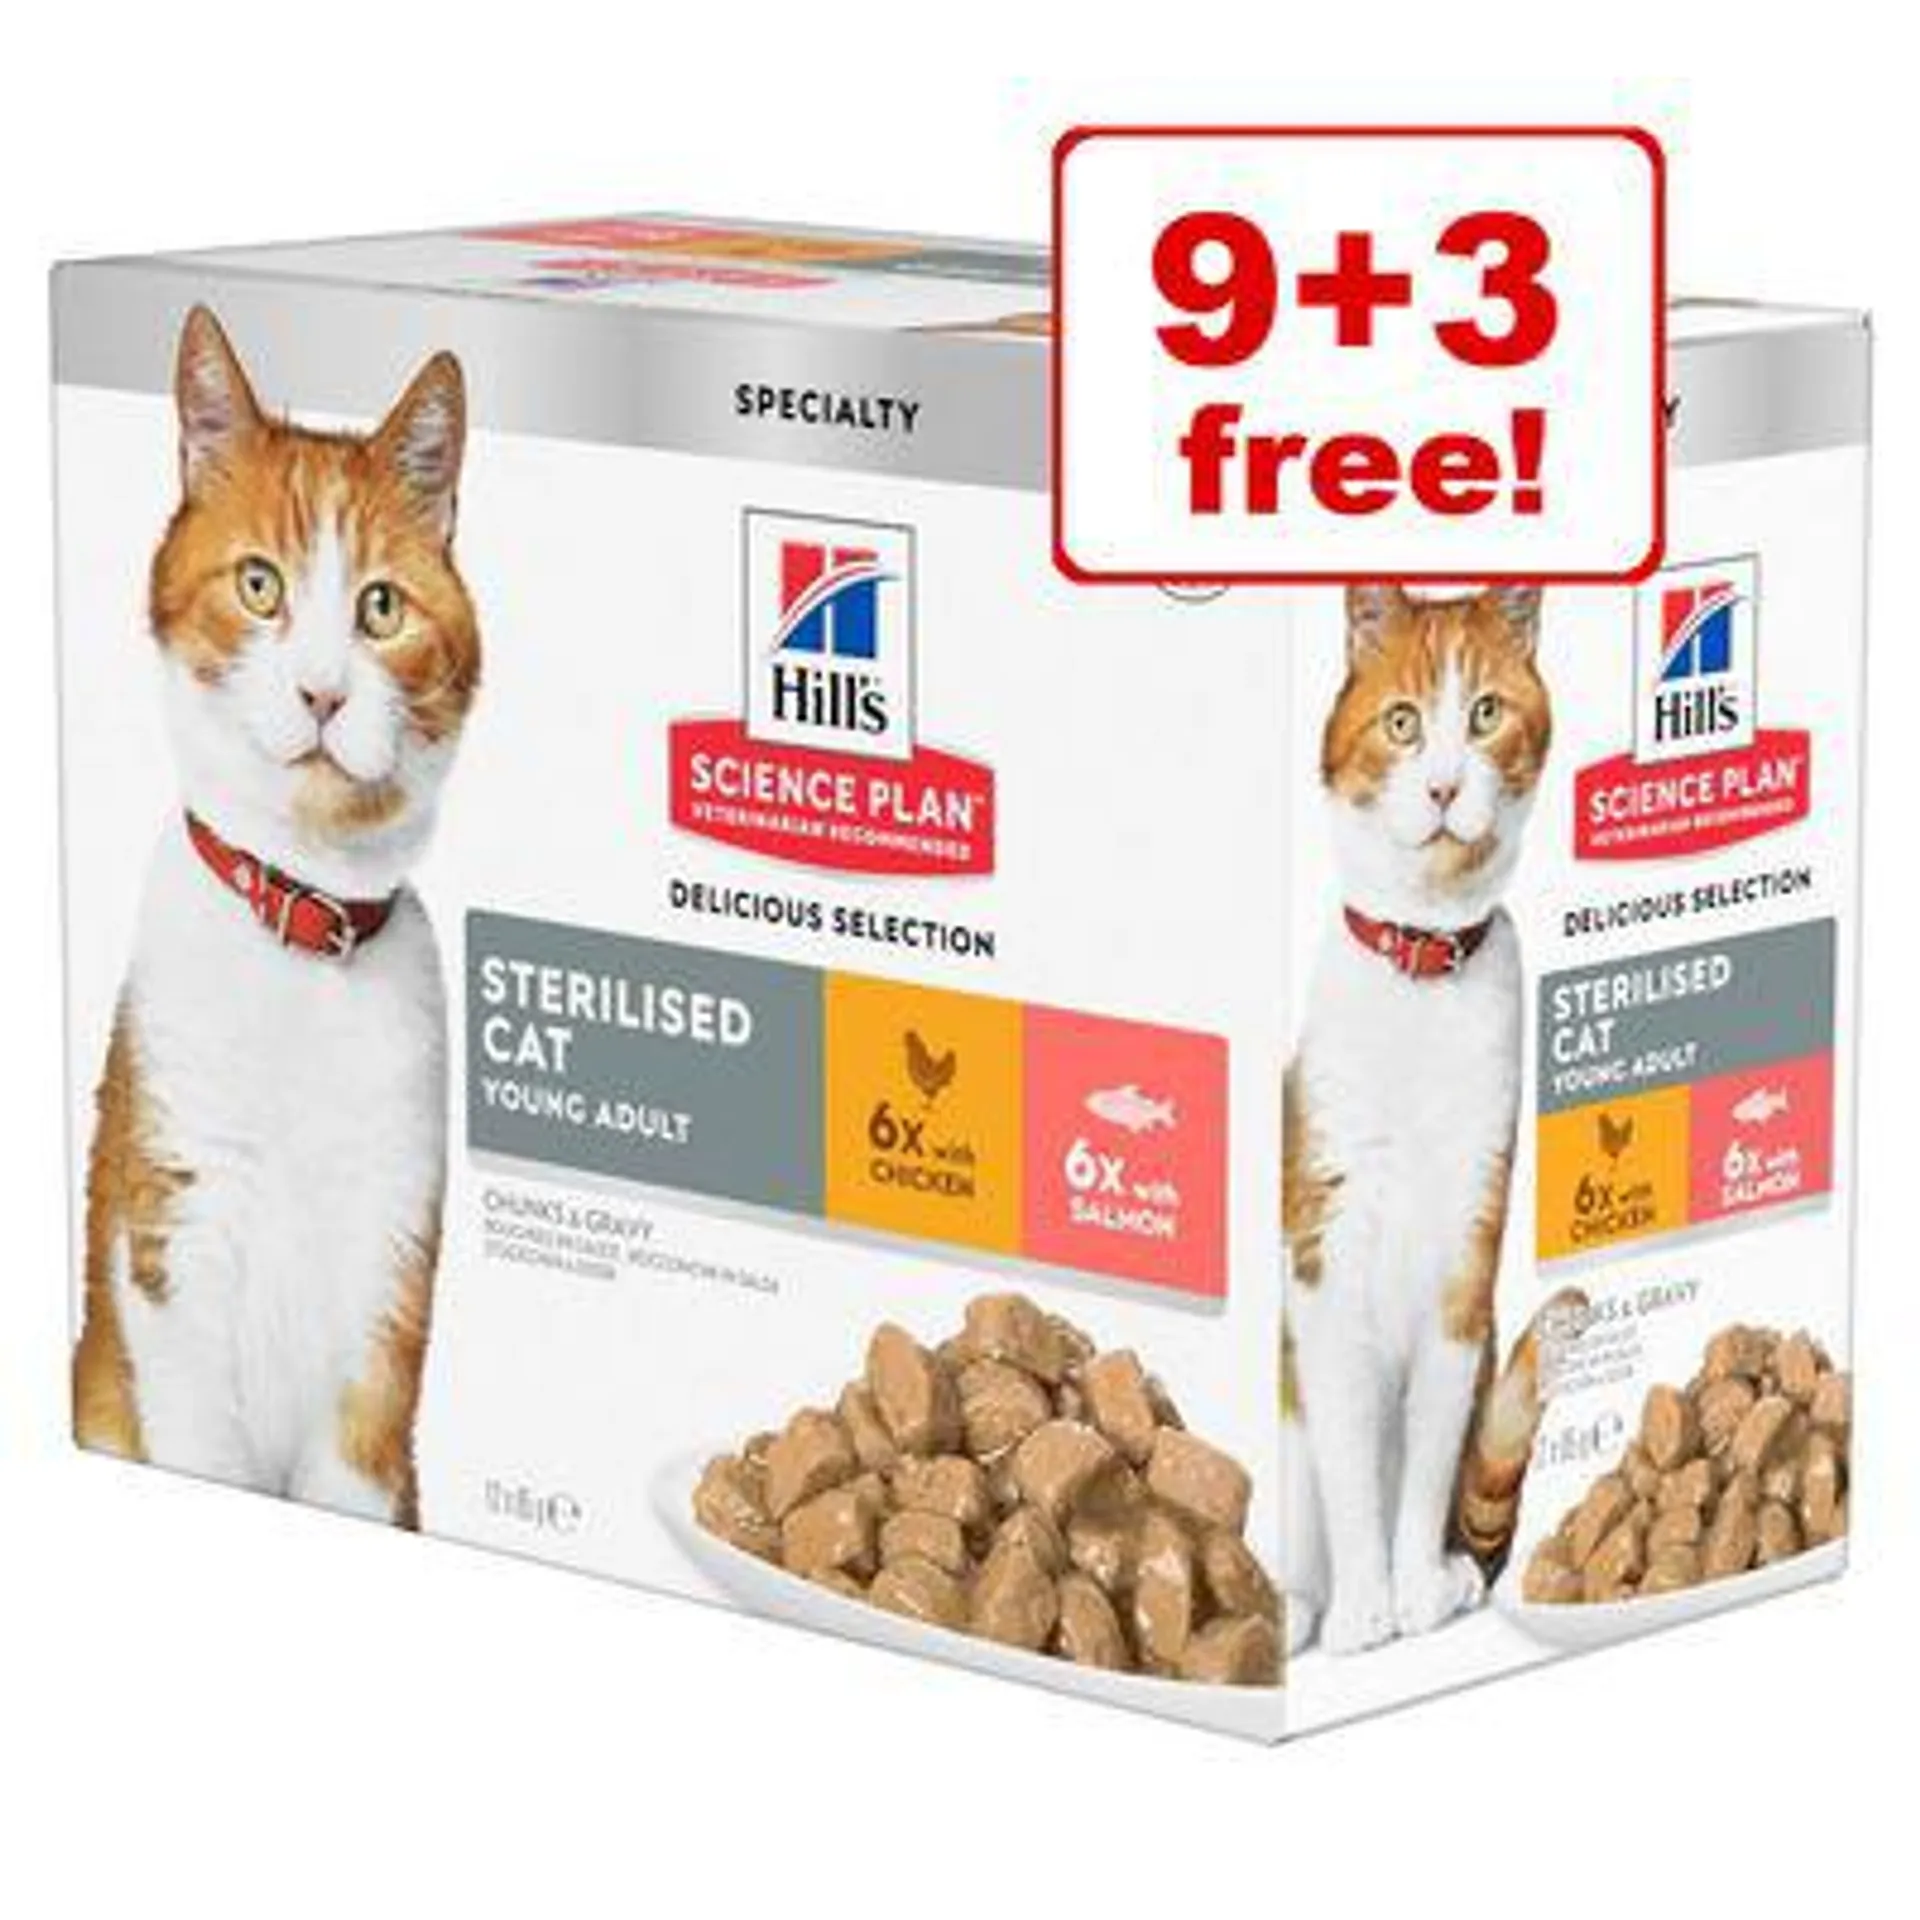 12 x 85g Hill's Science Plan Wet Cat Food - 9 + 3 Free! *